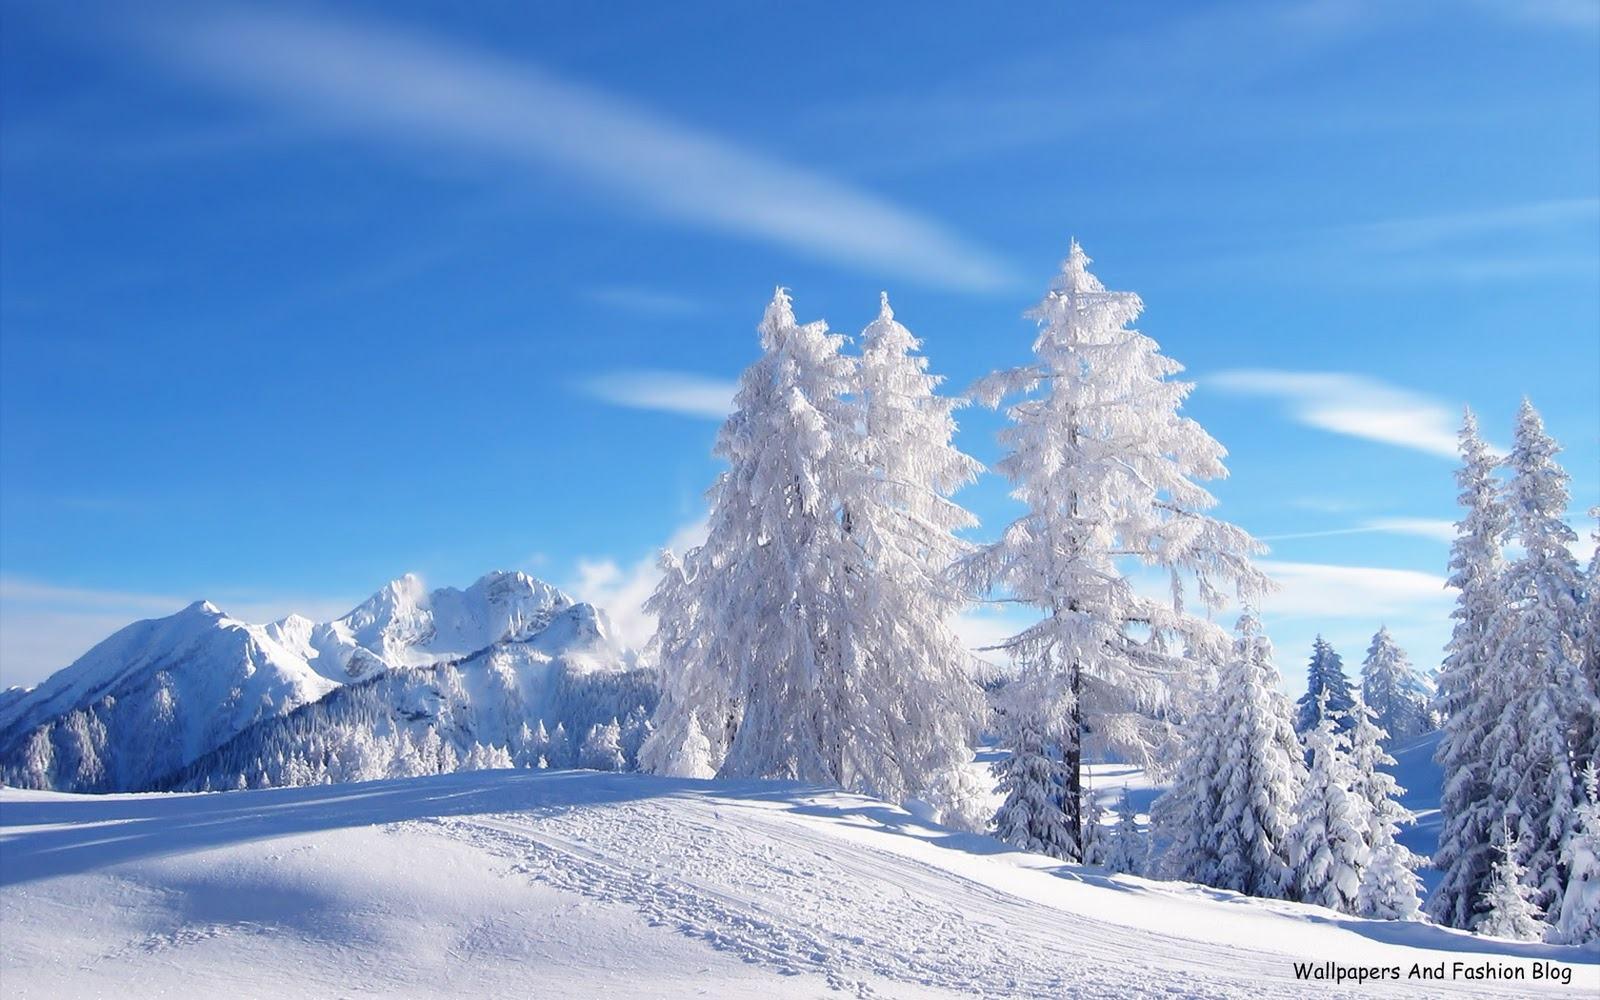 Wallpaper For > Winter Scenery Background